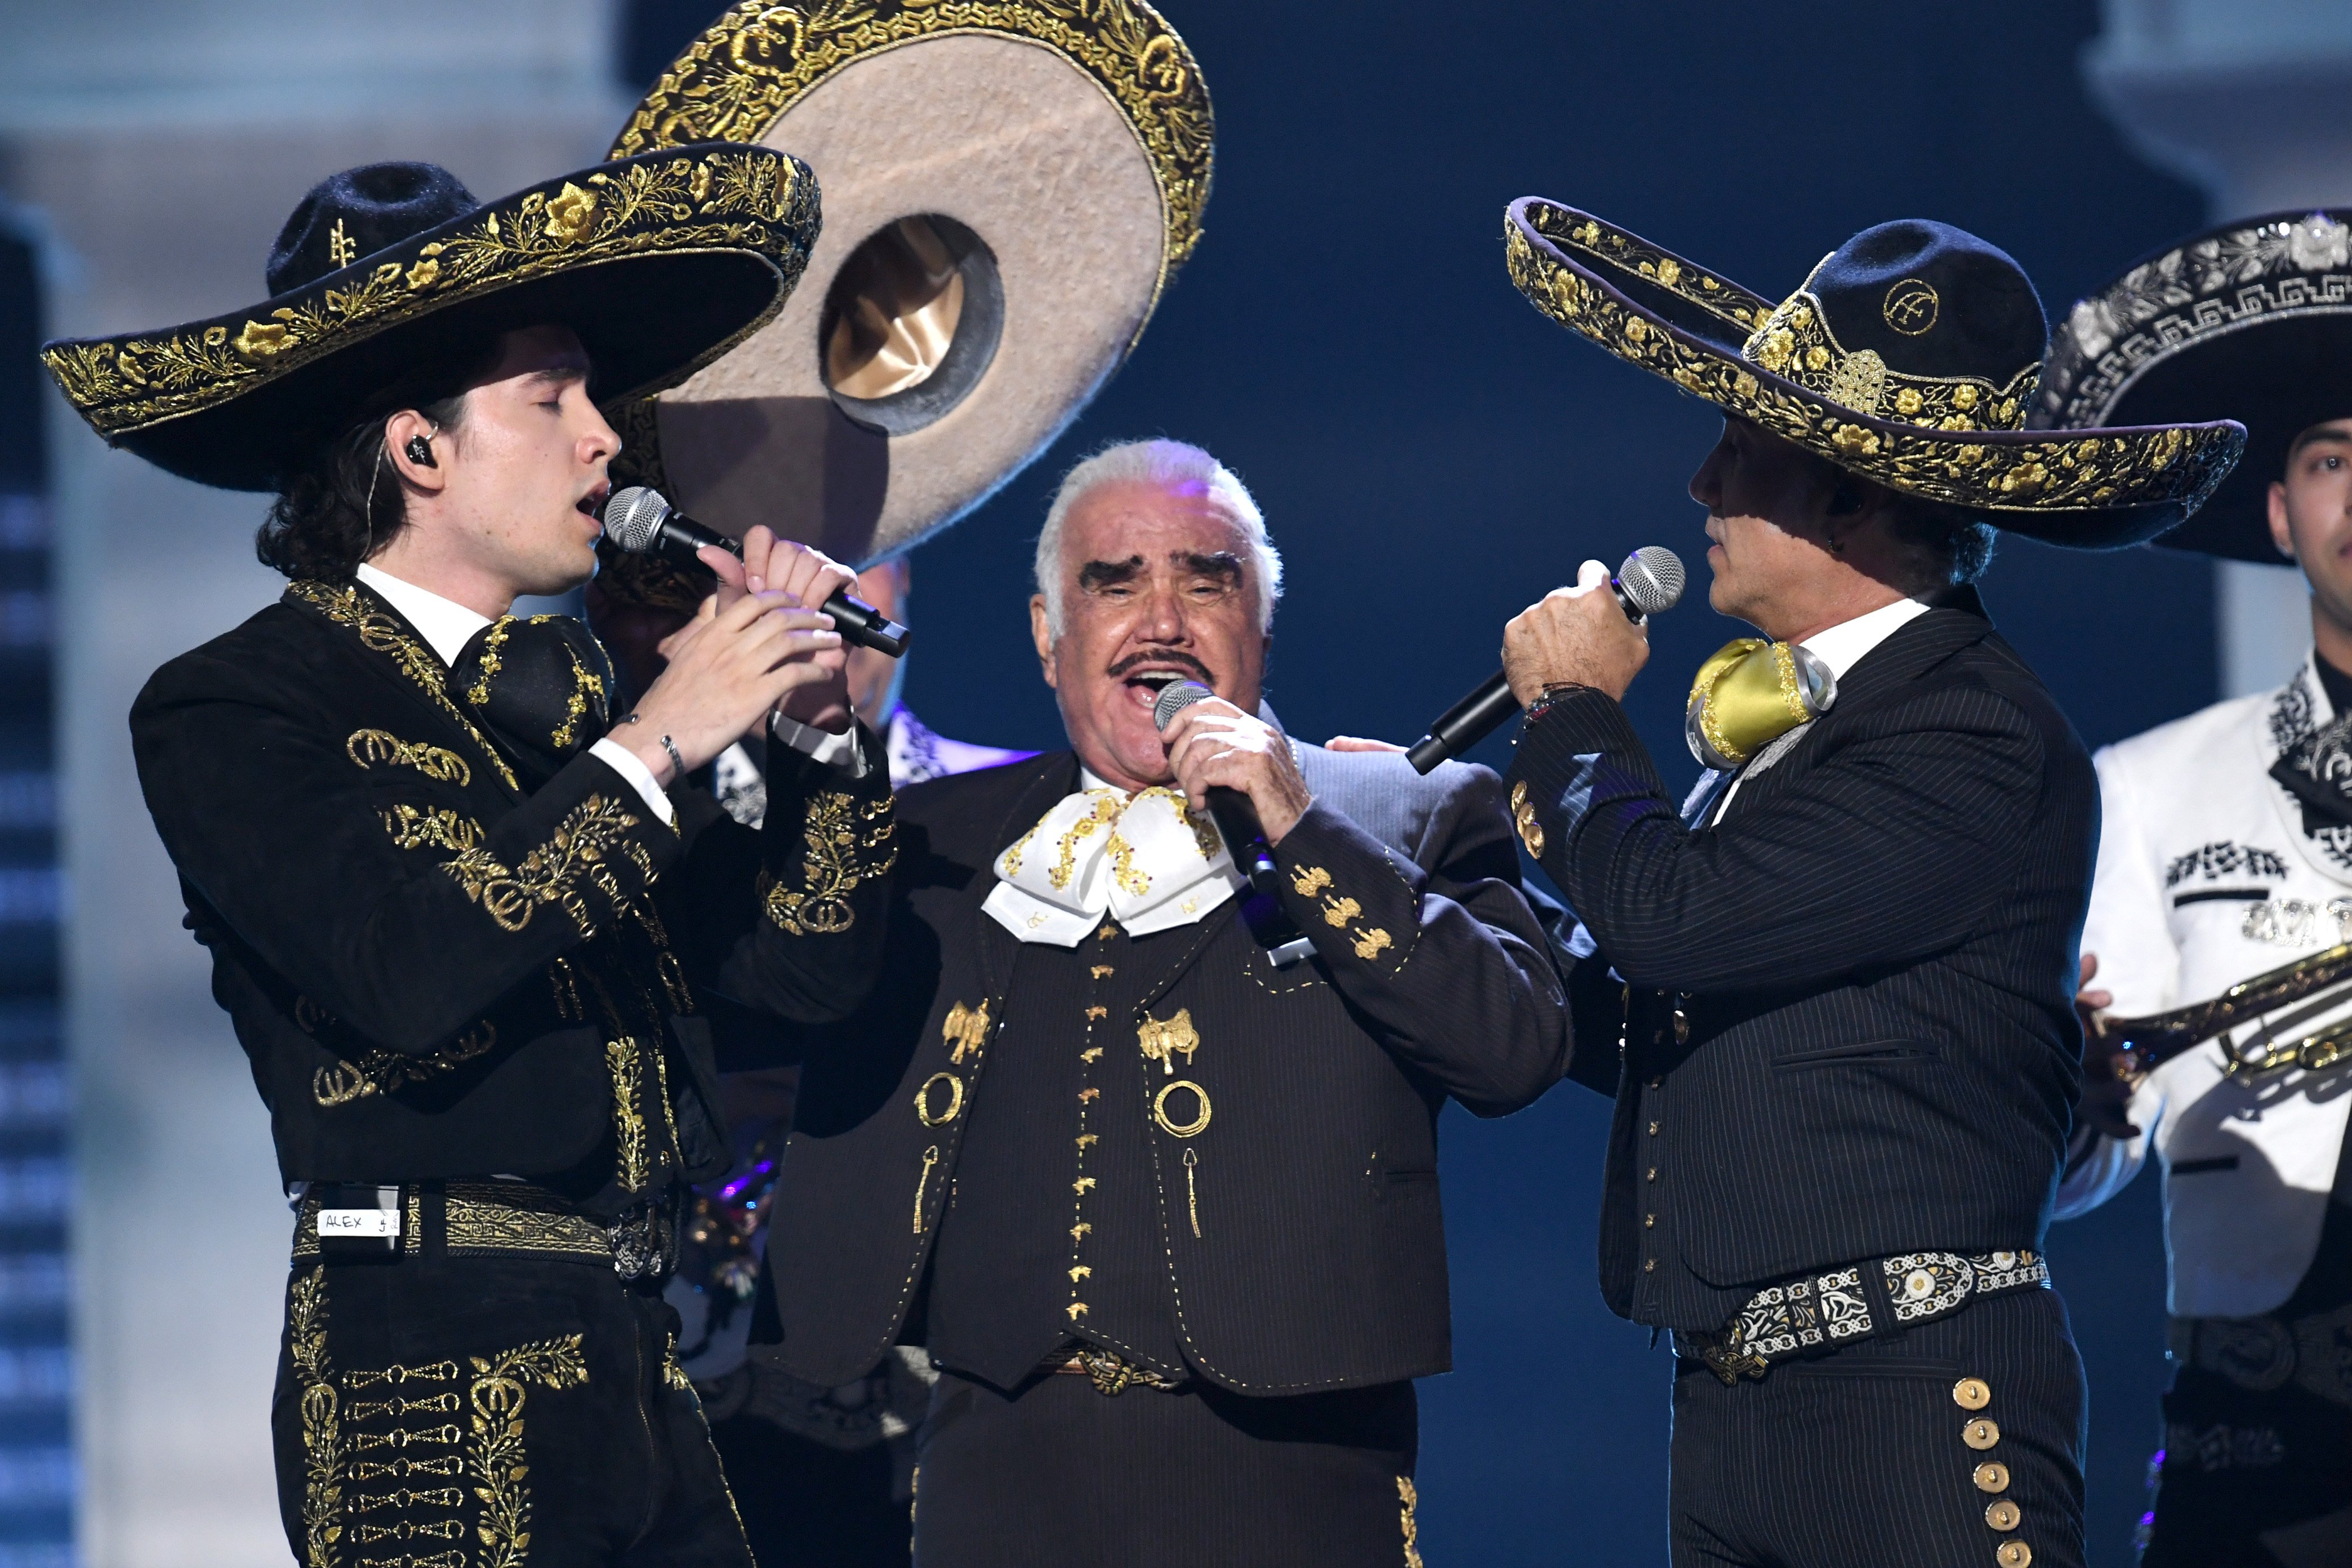 Alex Fernández, Vicente Fernandez, and Alejandro Fernández performing together at the 20th annual Latin Grammy Awards in Las Vegas on November 14, 2019 | Source: Getty Images